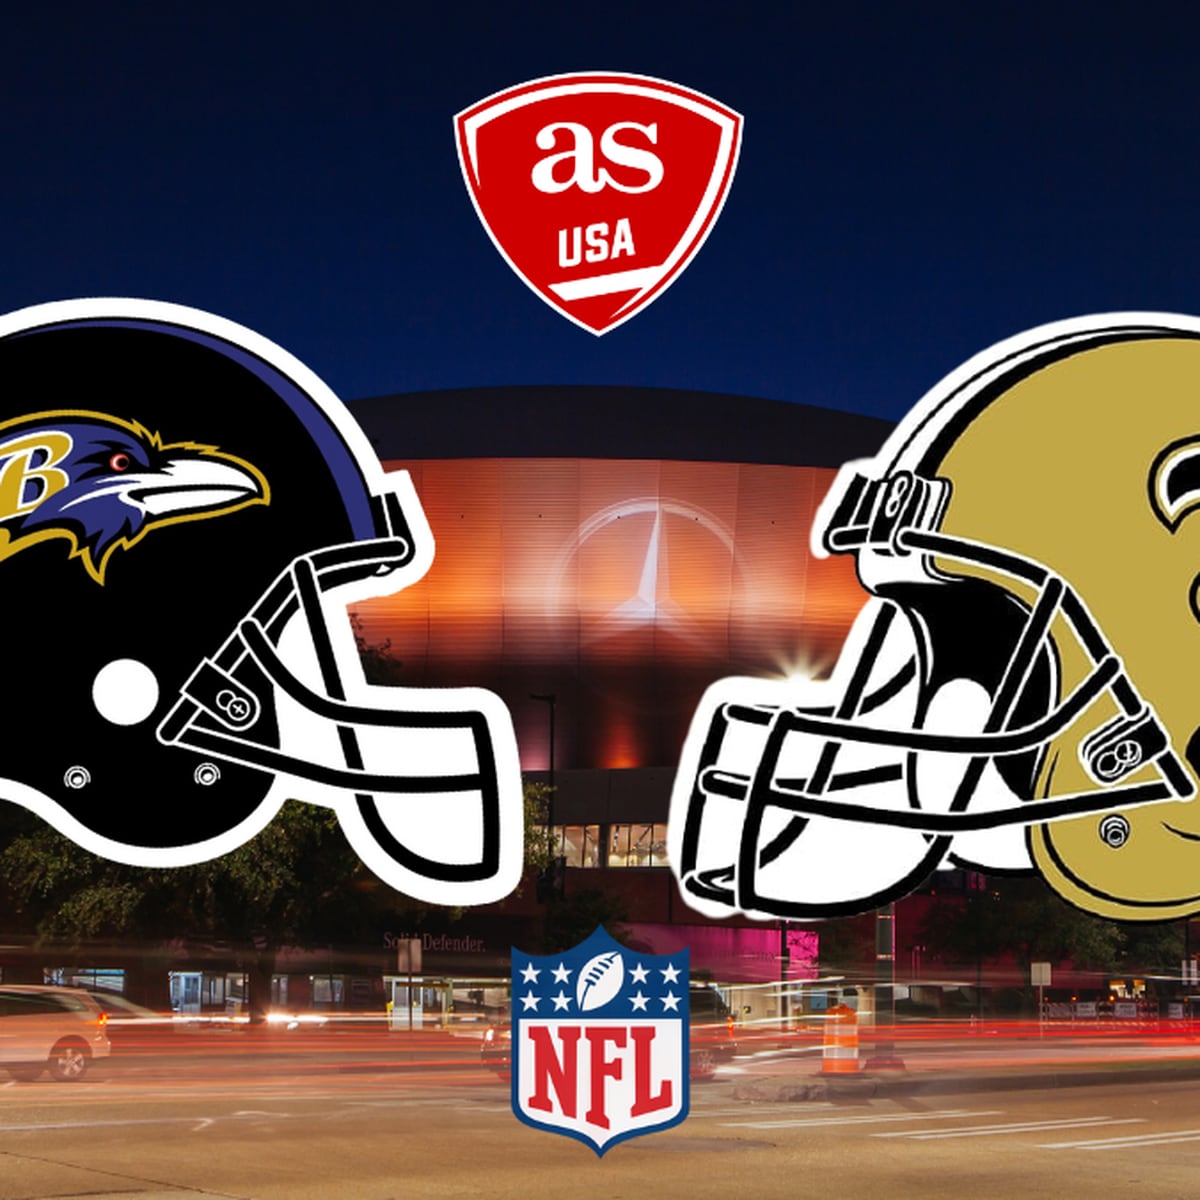 MNF: Ravens vs. Saints: Final score, play-by-play and full highlights